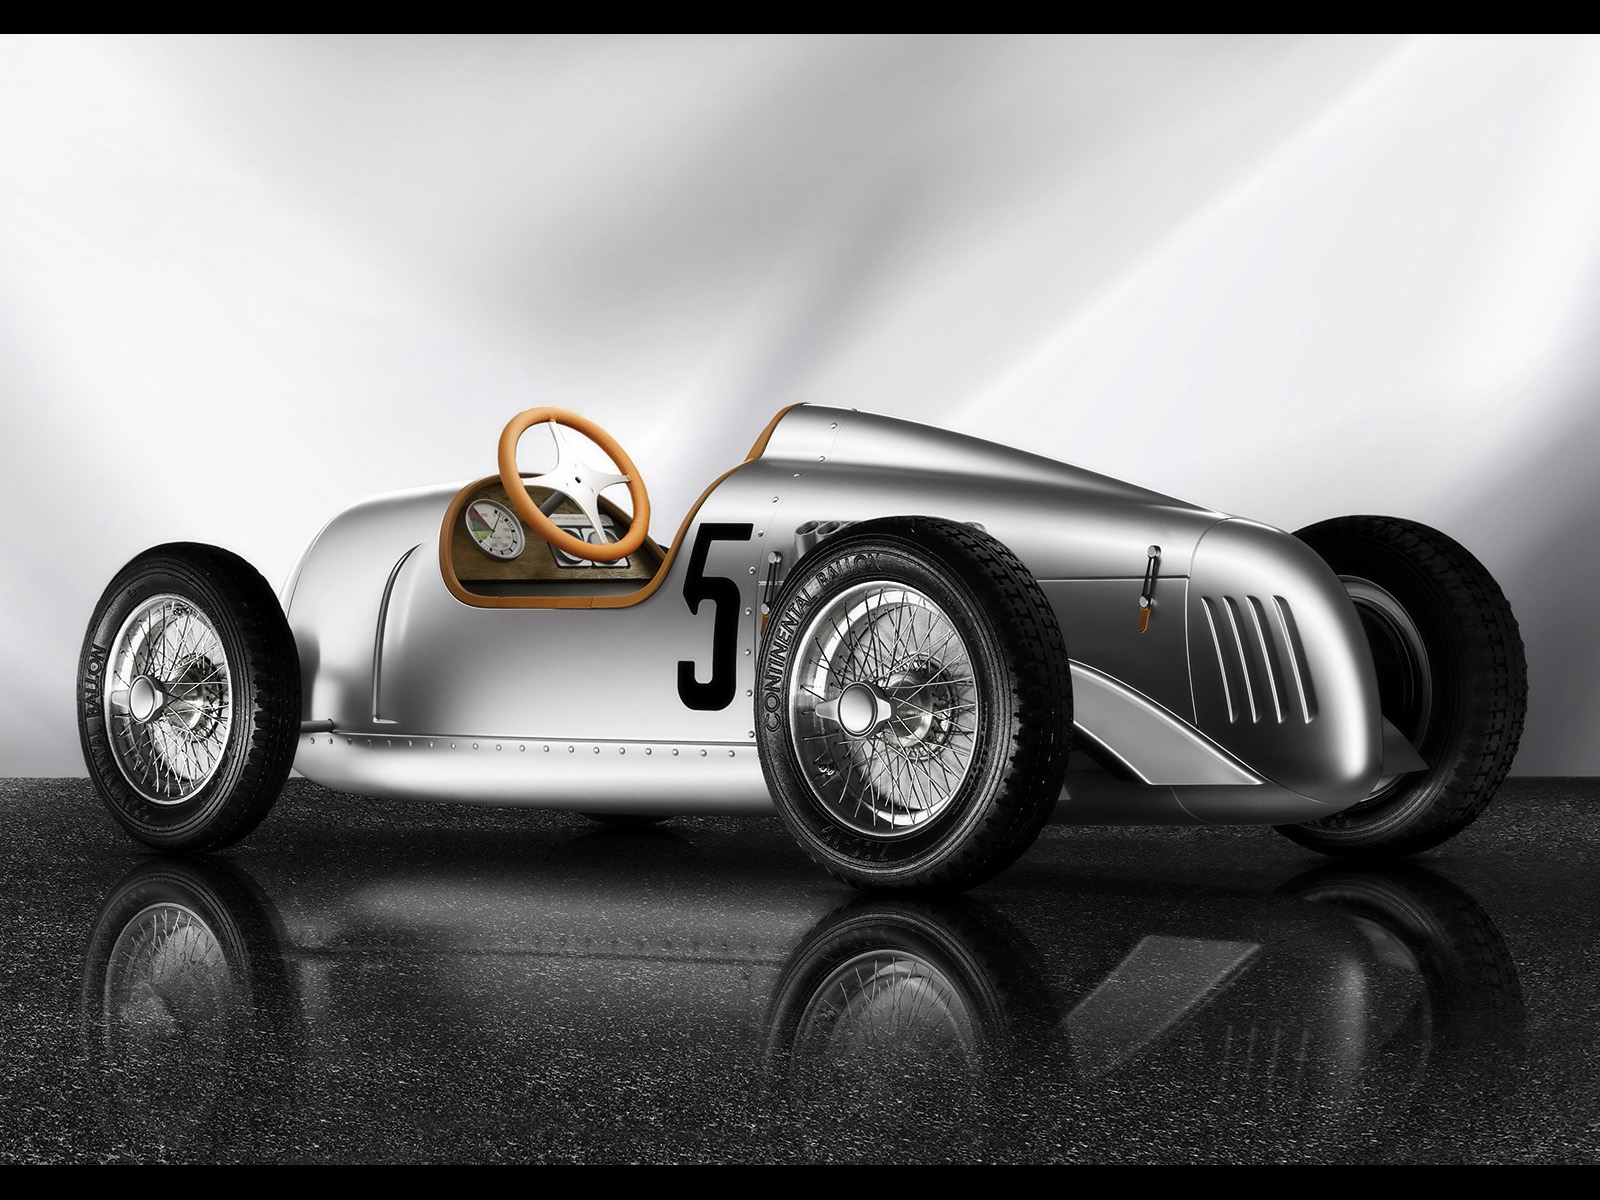 2007 Auto Union Type C Pedal Car - Rear And Side - 1600x1200 ...